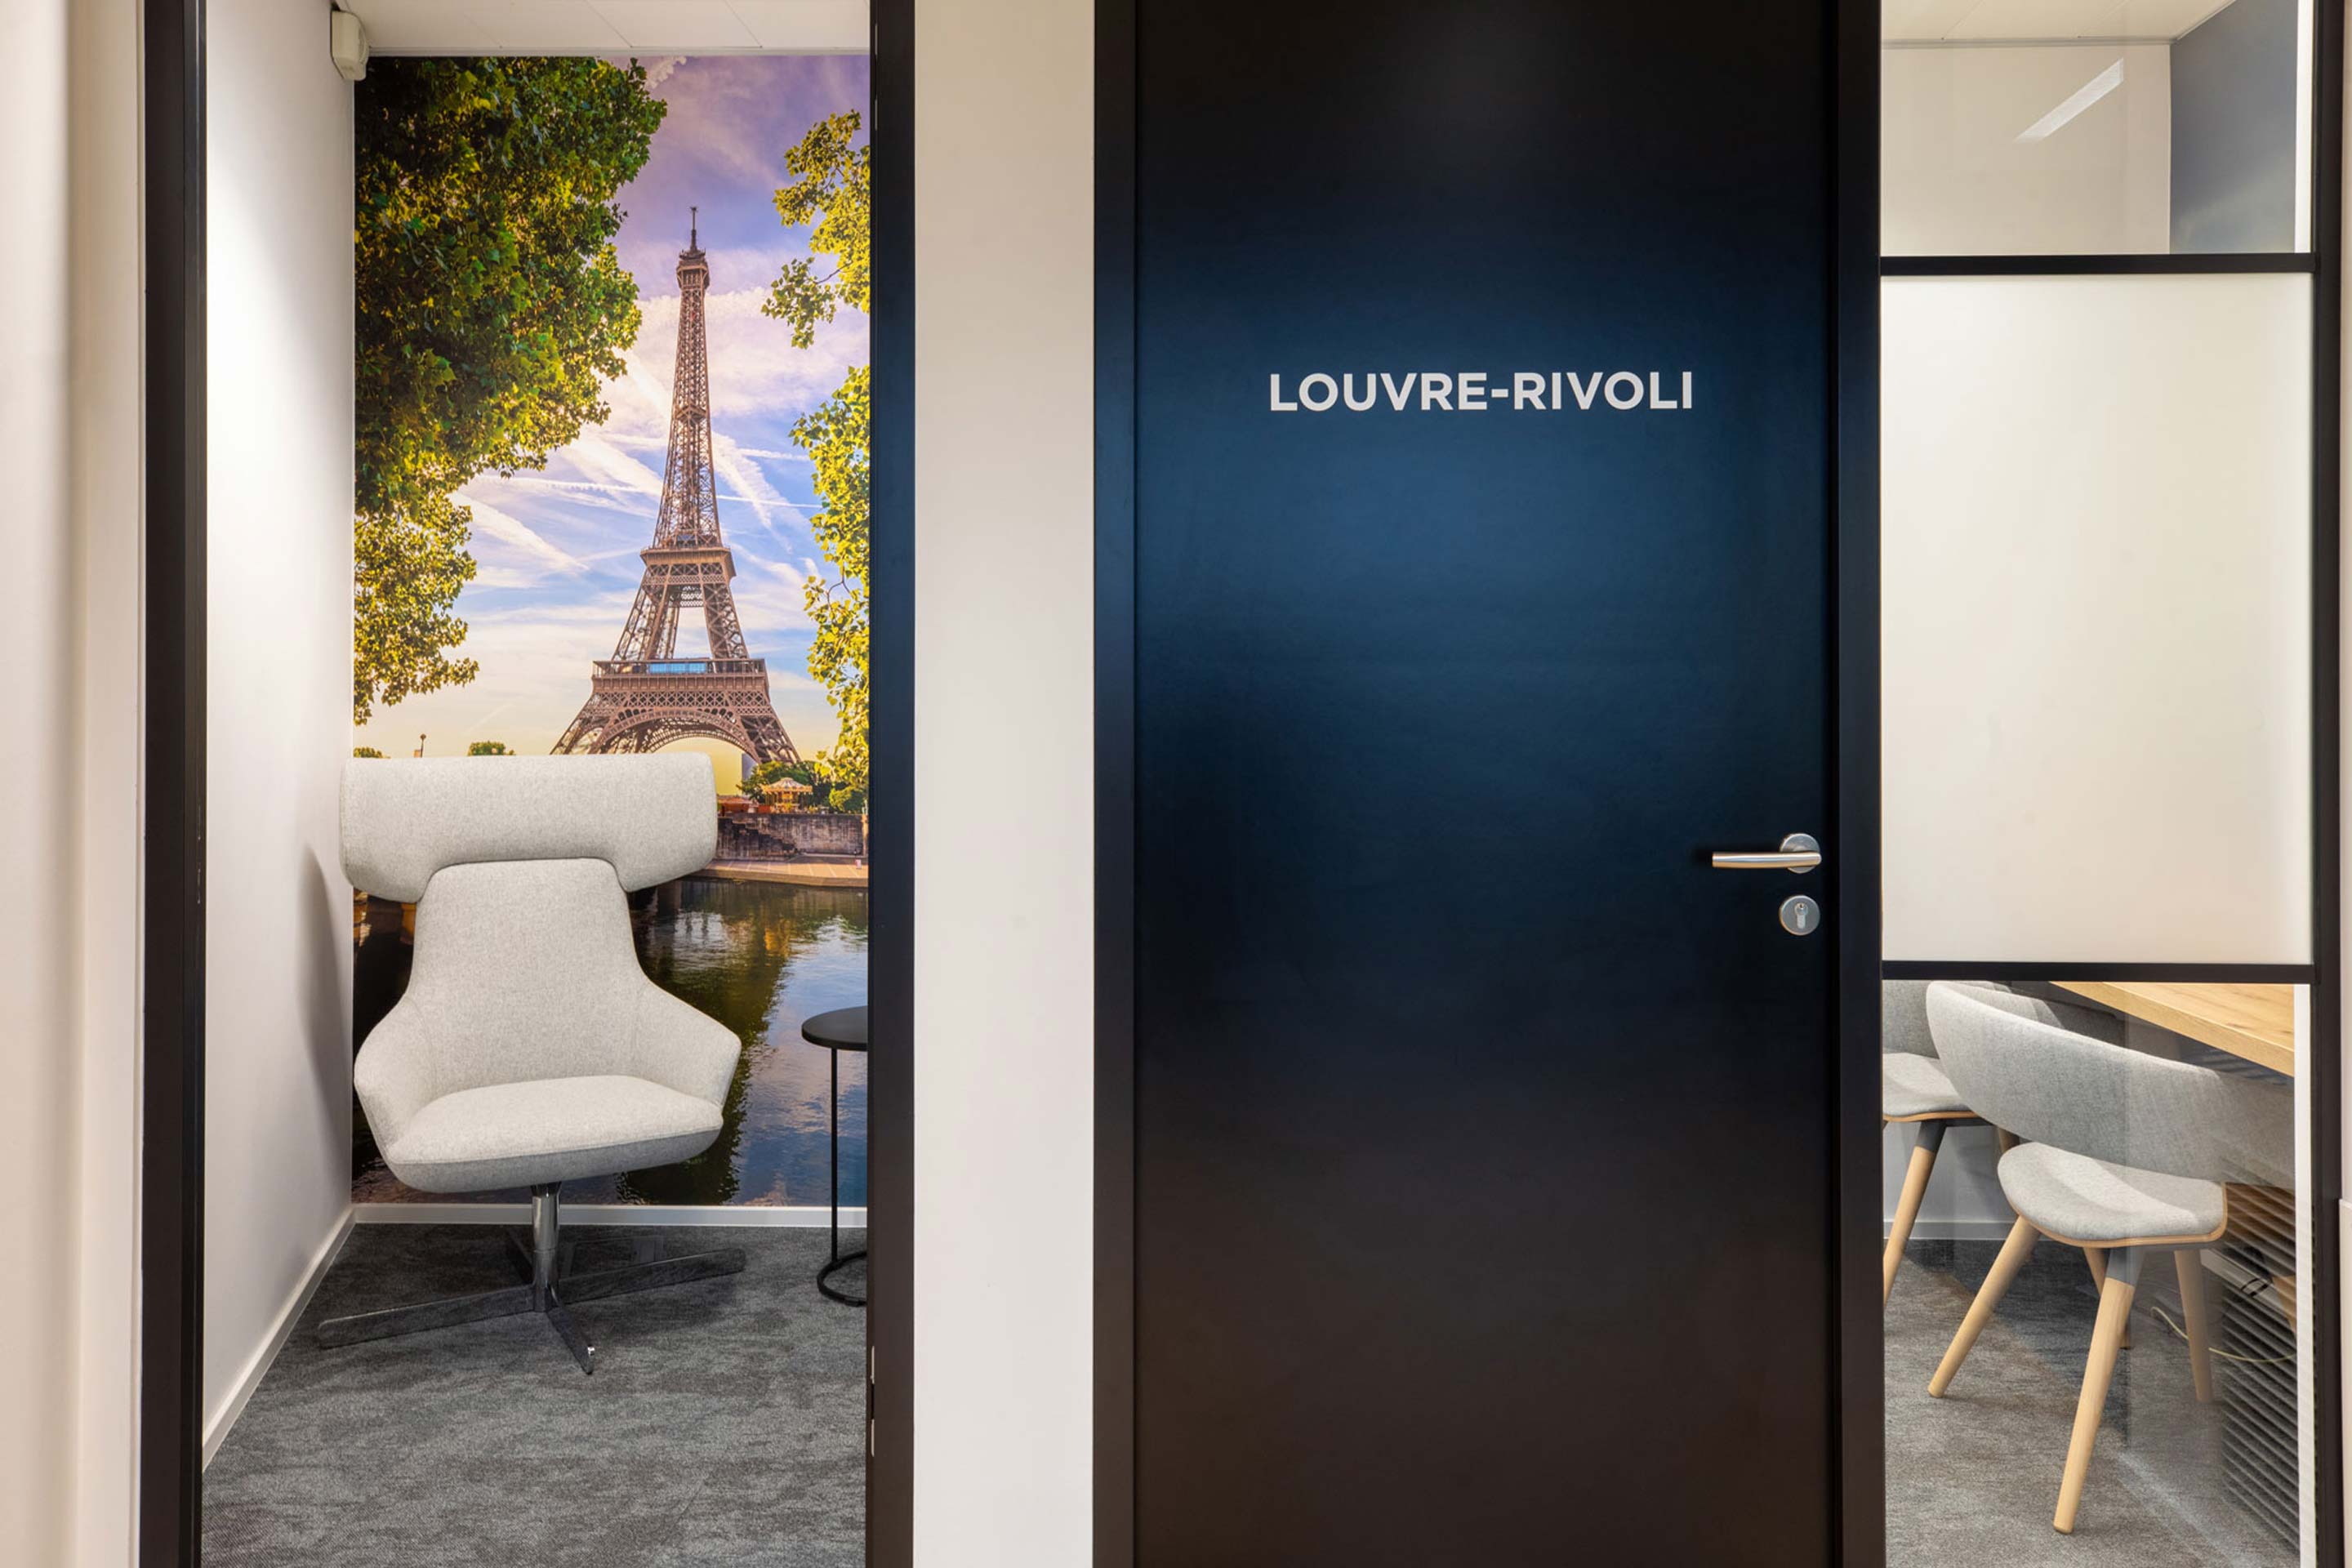 Two small meeting rooms with soft seating and Eiffel Tower on the wall